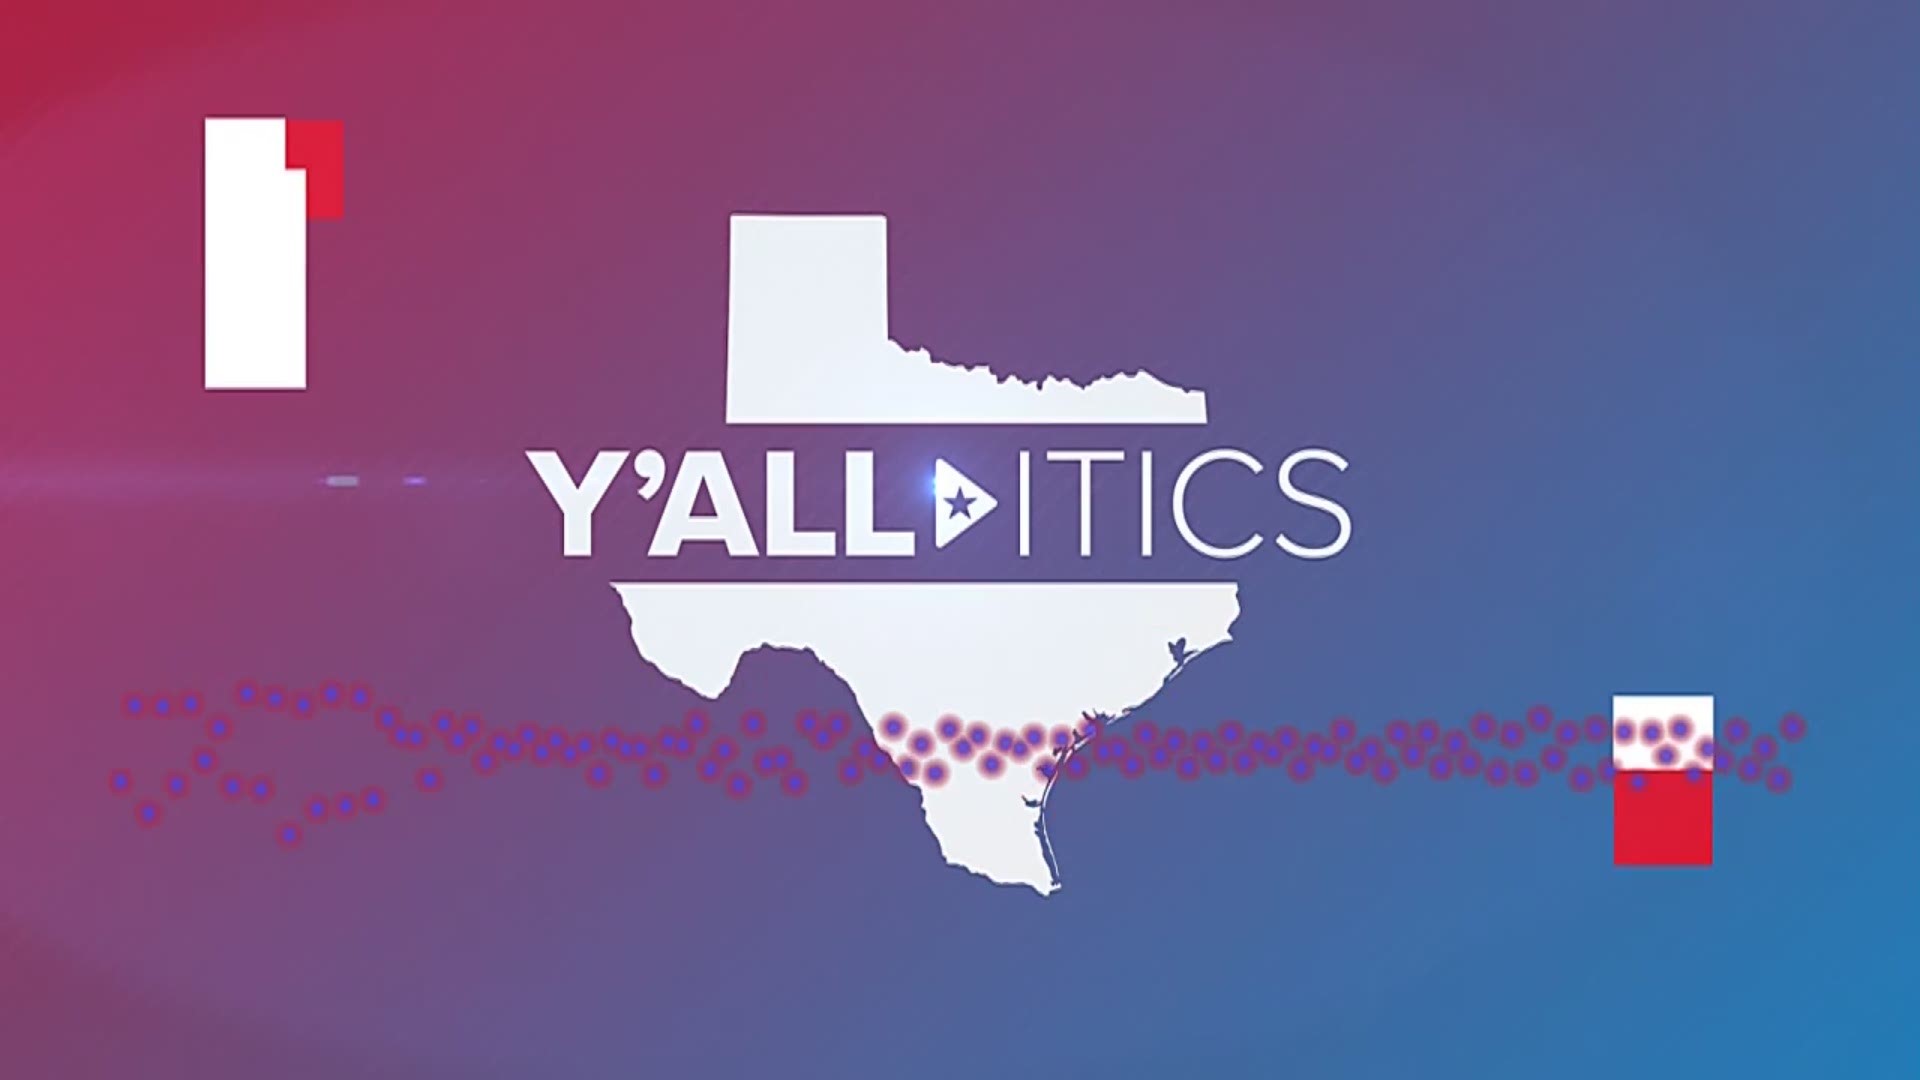 Each week, Jason Whitely and Jason Wheeler will crack open an ice-cold Texas brew and explore a topic affecting Texans as we gear up for the 2020 election.